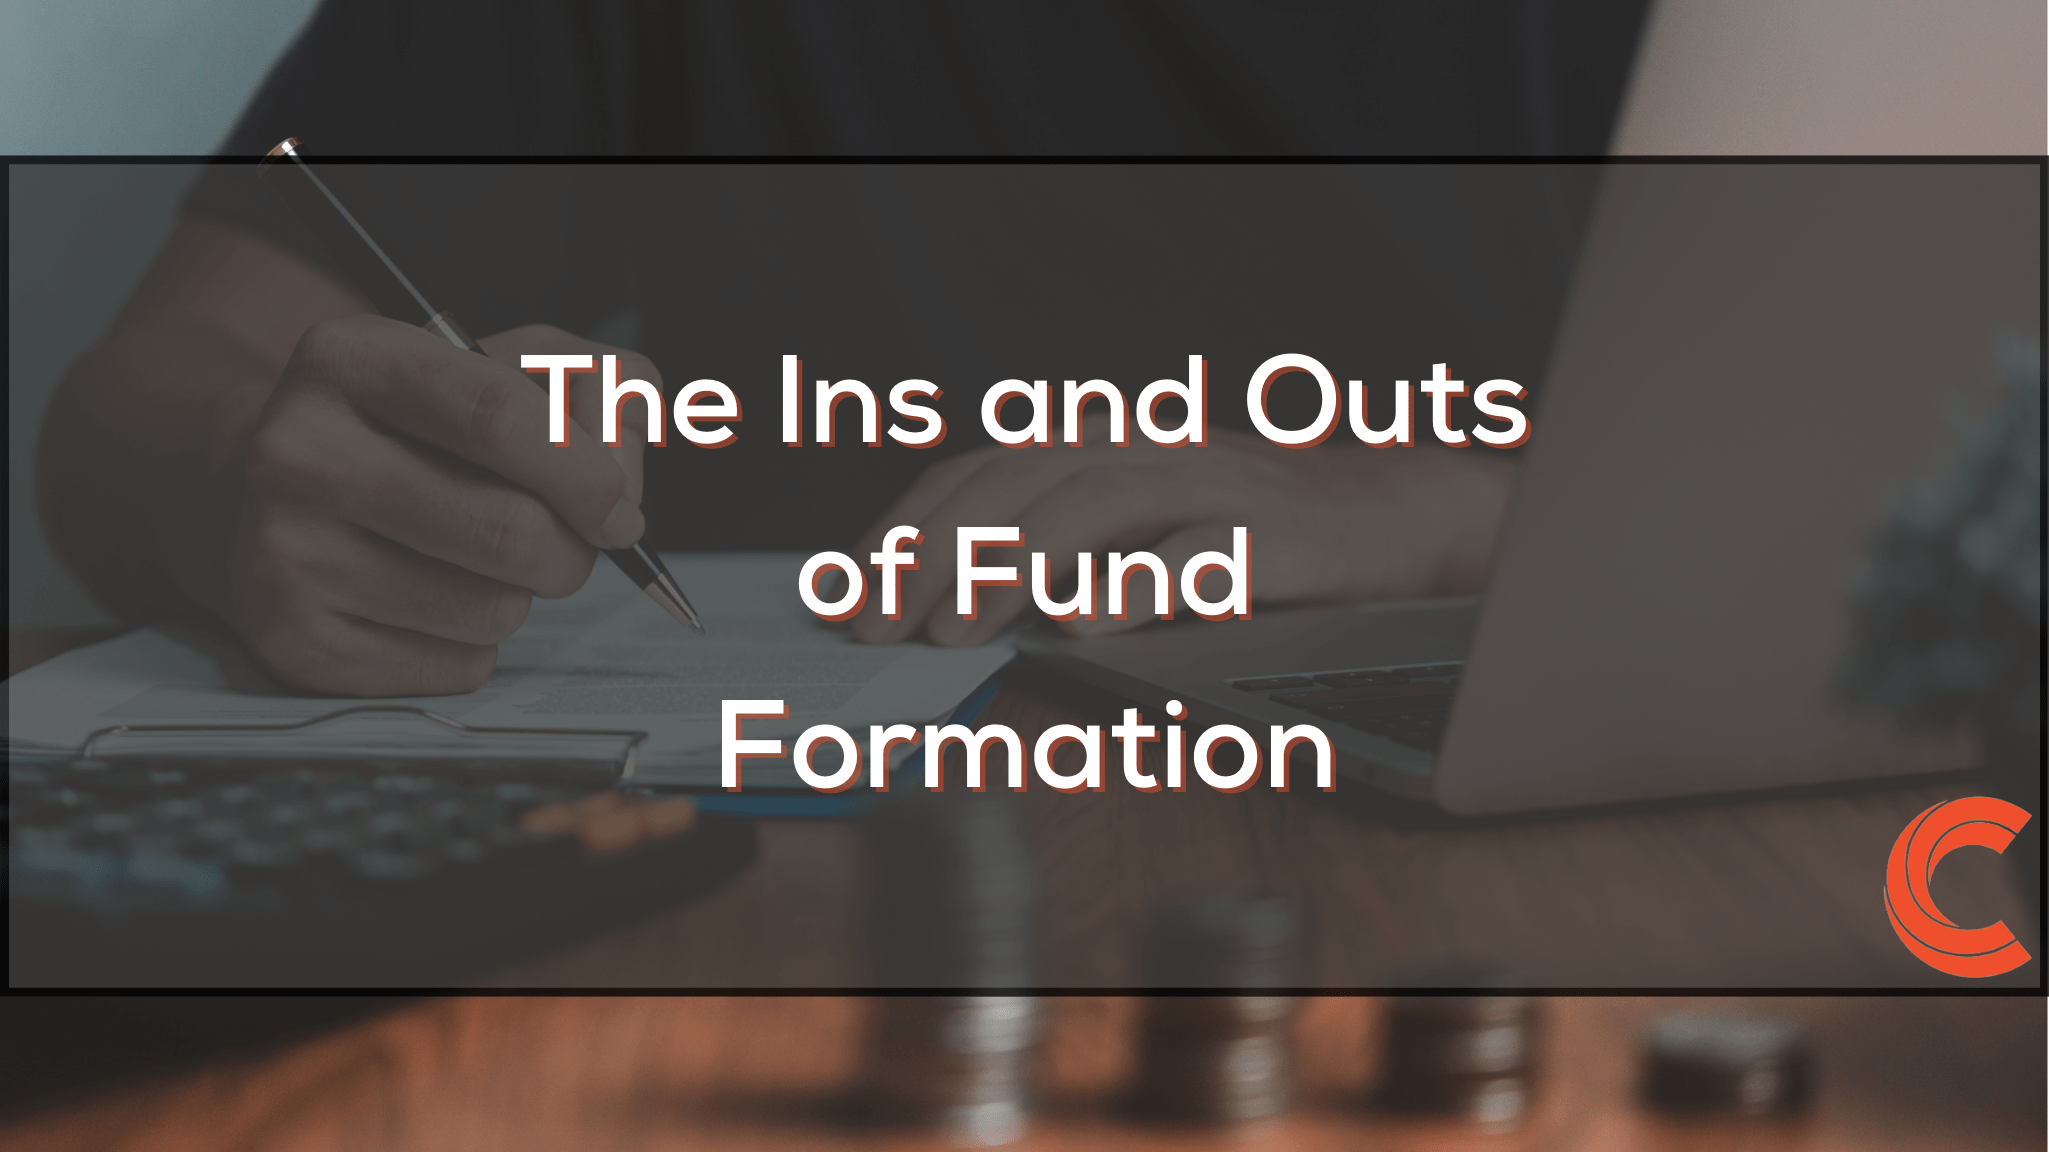 The Ins and Outs of Fund Formation